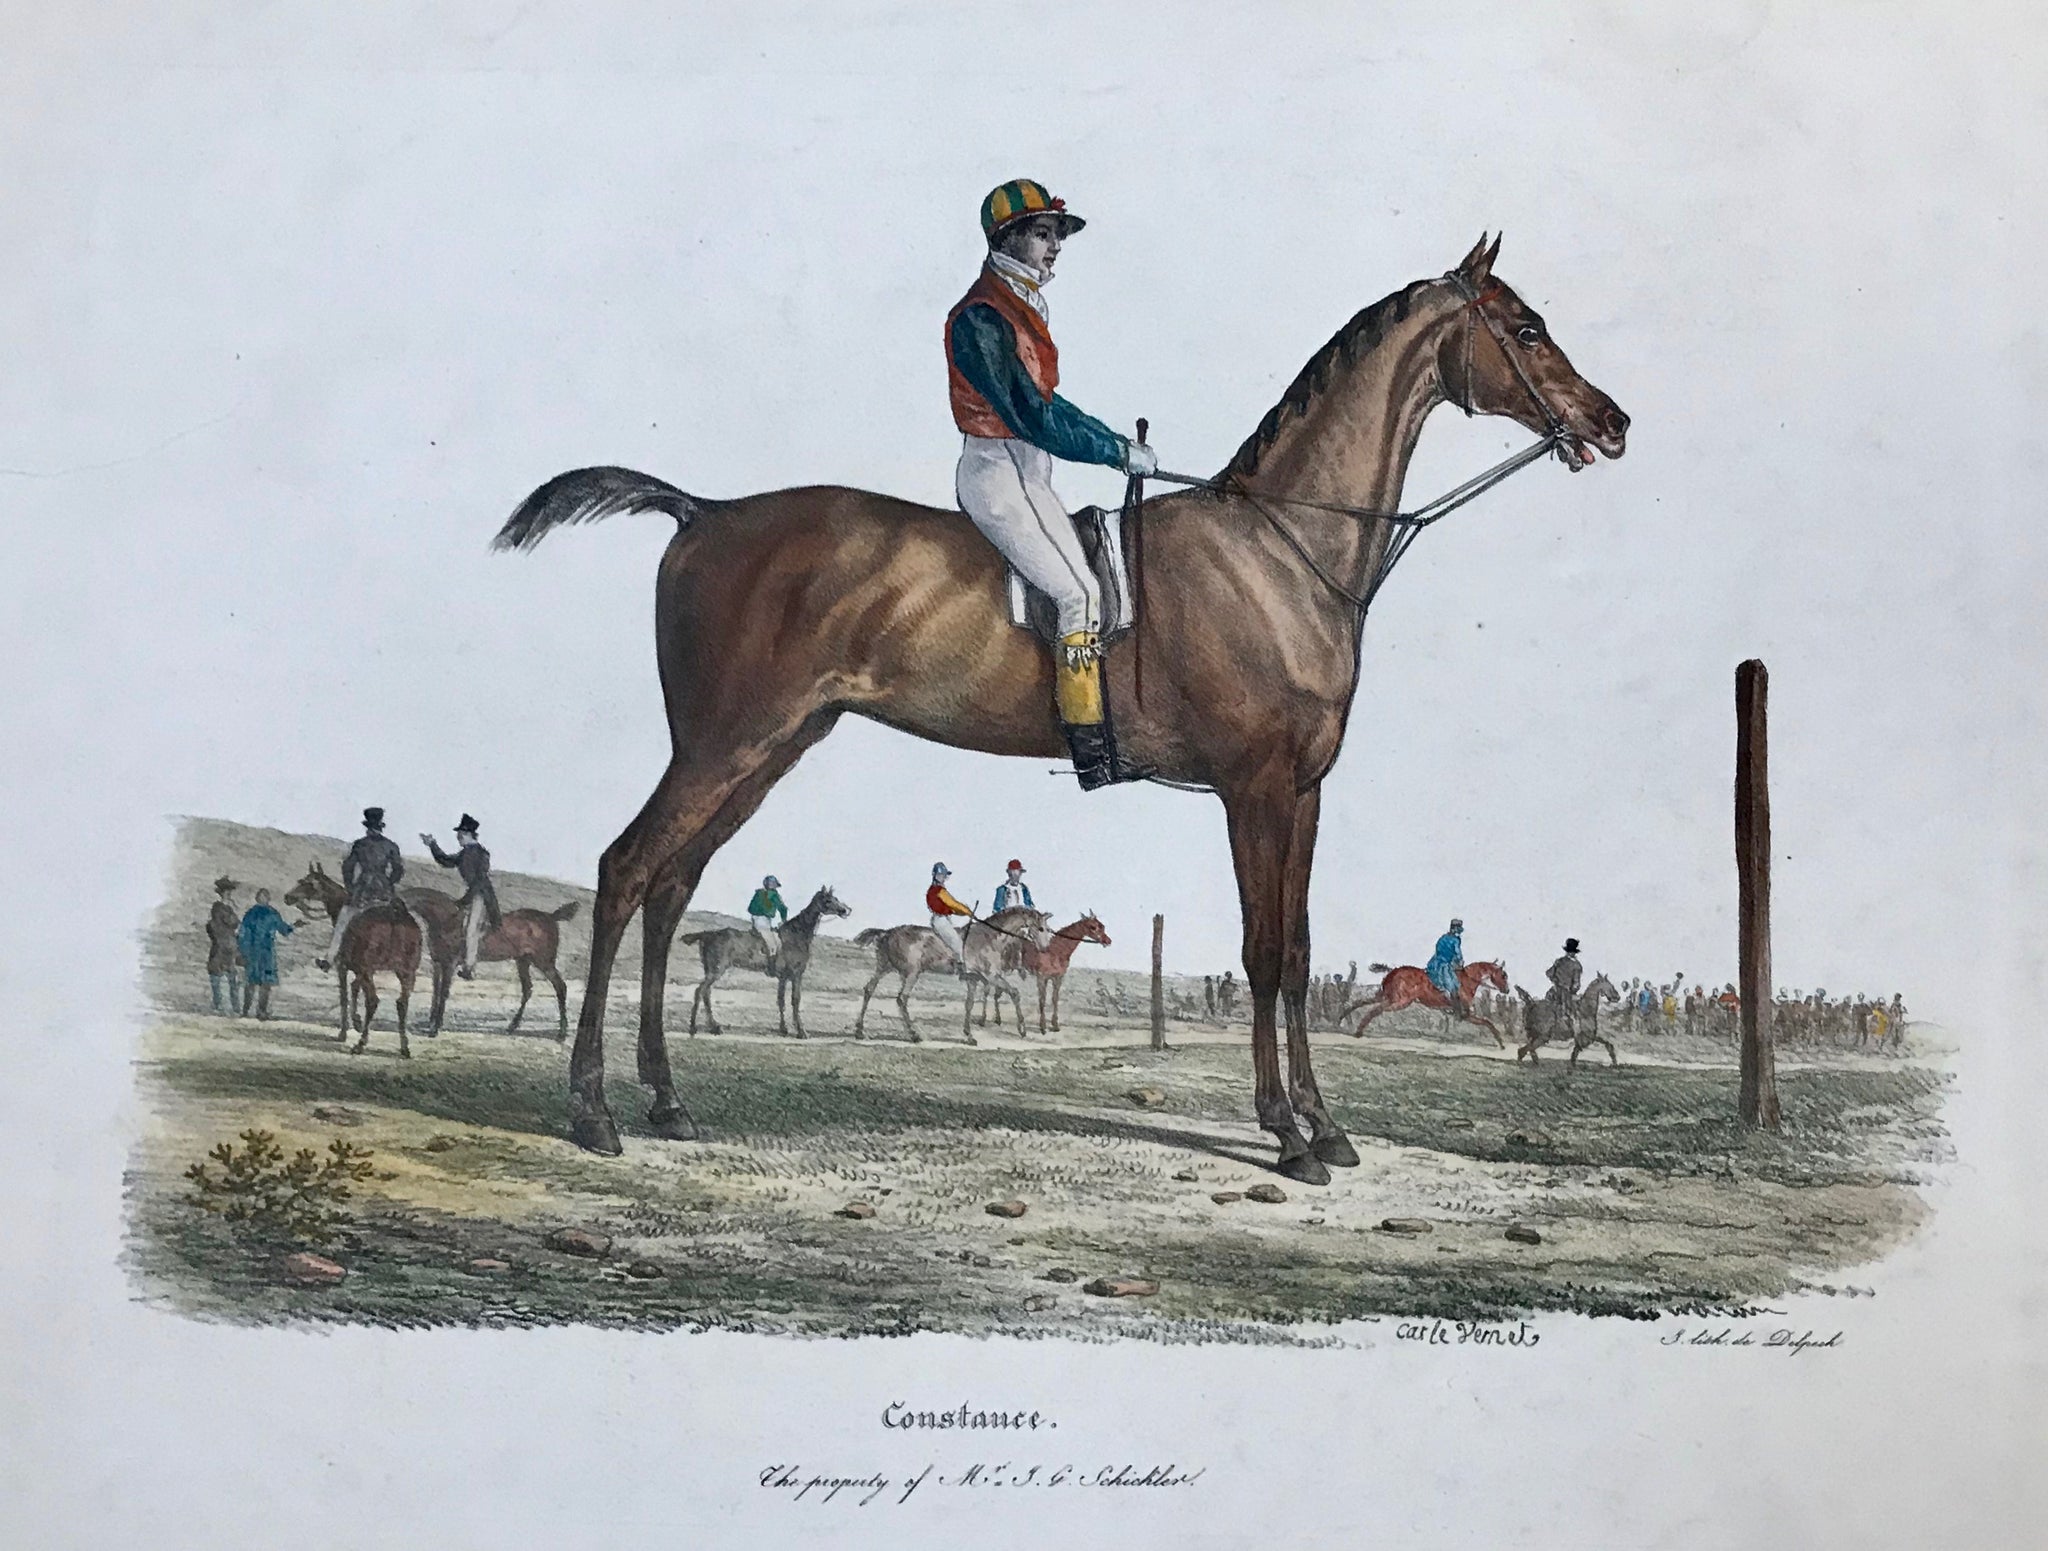 "Constance - The property of Mr. J.G.Schickler"  "Constance" with jockey mounted. In the background other race horses  Large folio size hand-colored lithograph by Francois Seraphin Delpech (1778-1825)  After the painting by Carle Vernet (1758-1736)